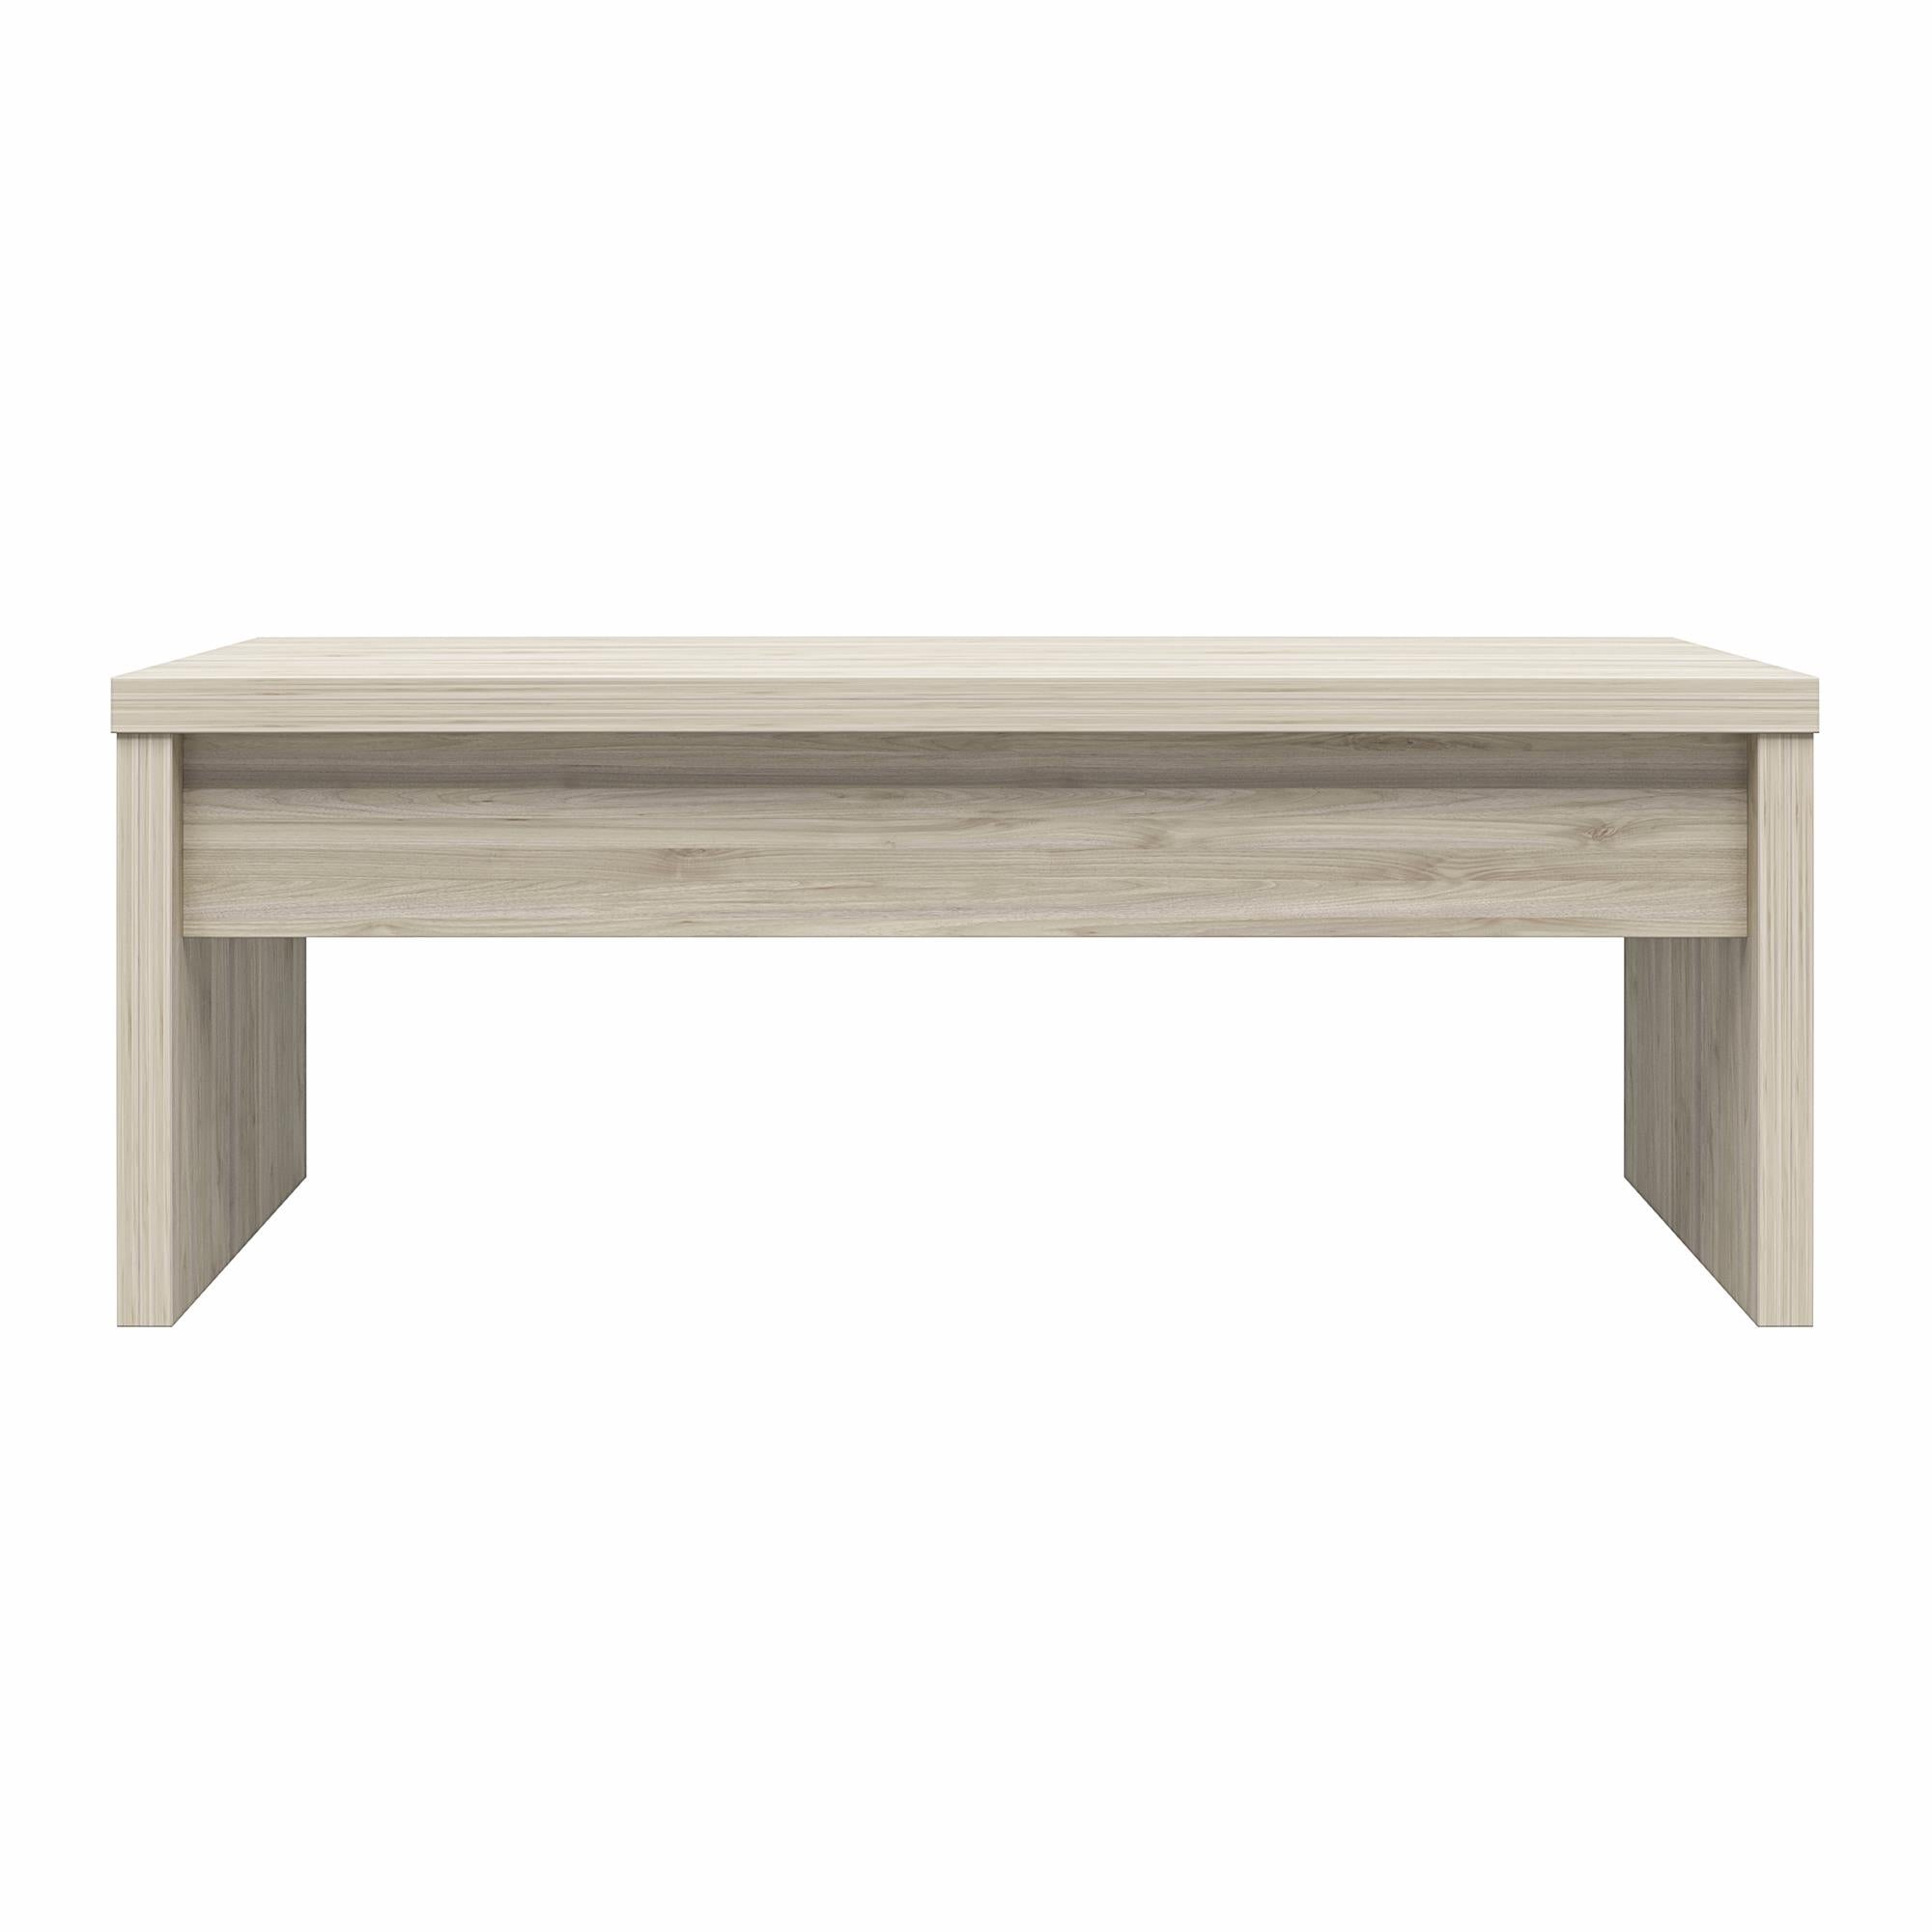 Luxor 18-inch Tall Lift Top Coffee Table with Drawer, Dark Walnut